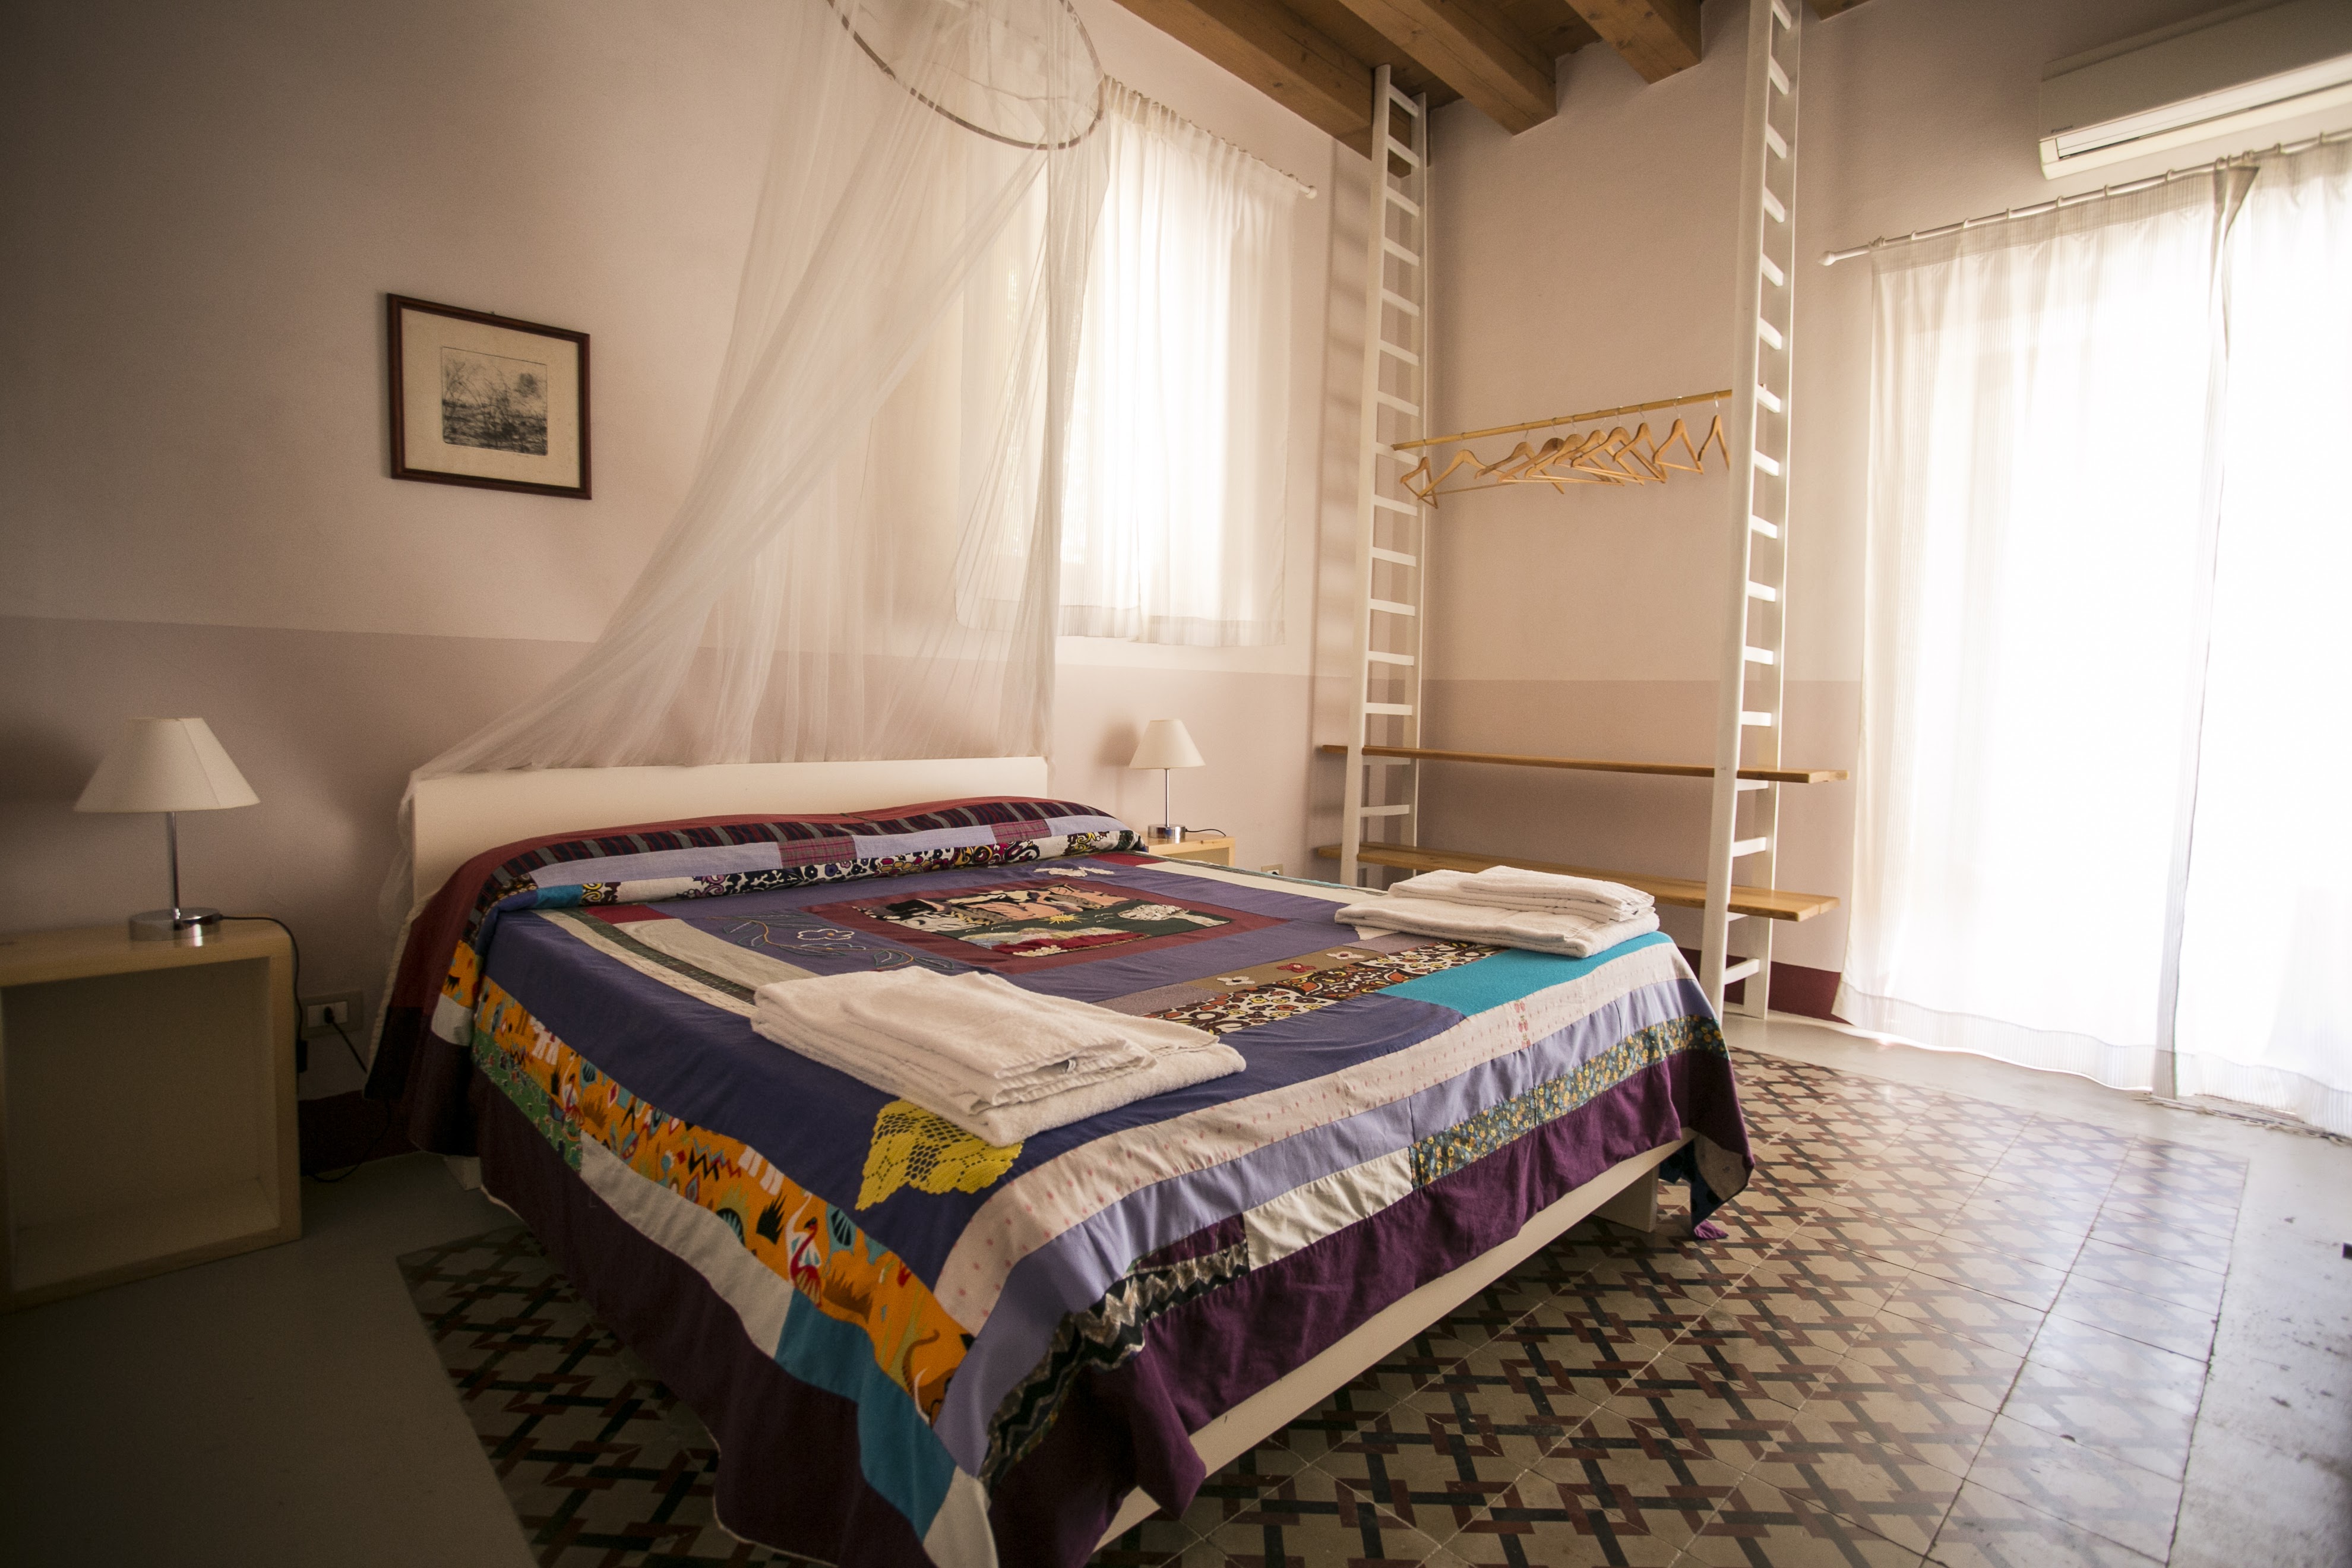 Accommodation 6 Km From Siracusa City - Syracuse